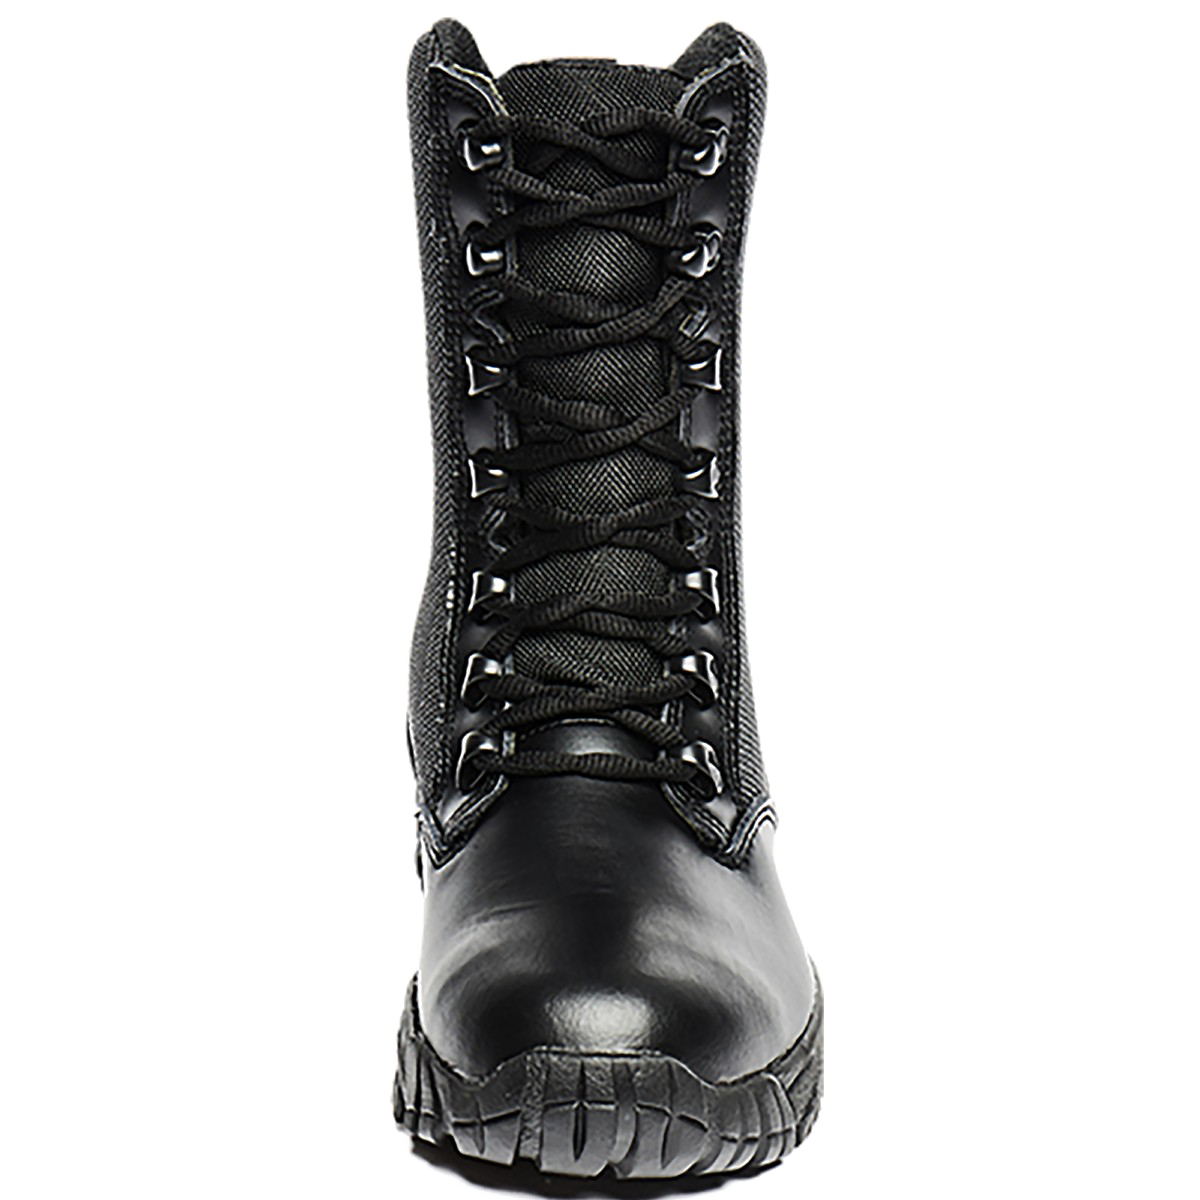 Download PNG image - Boots Background Isolated PNG 